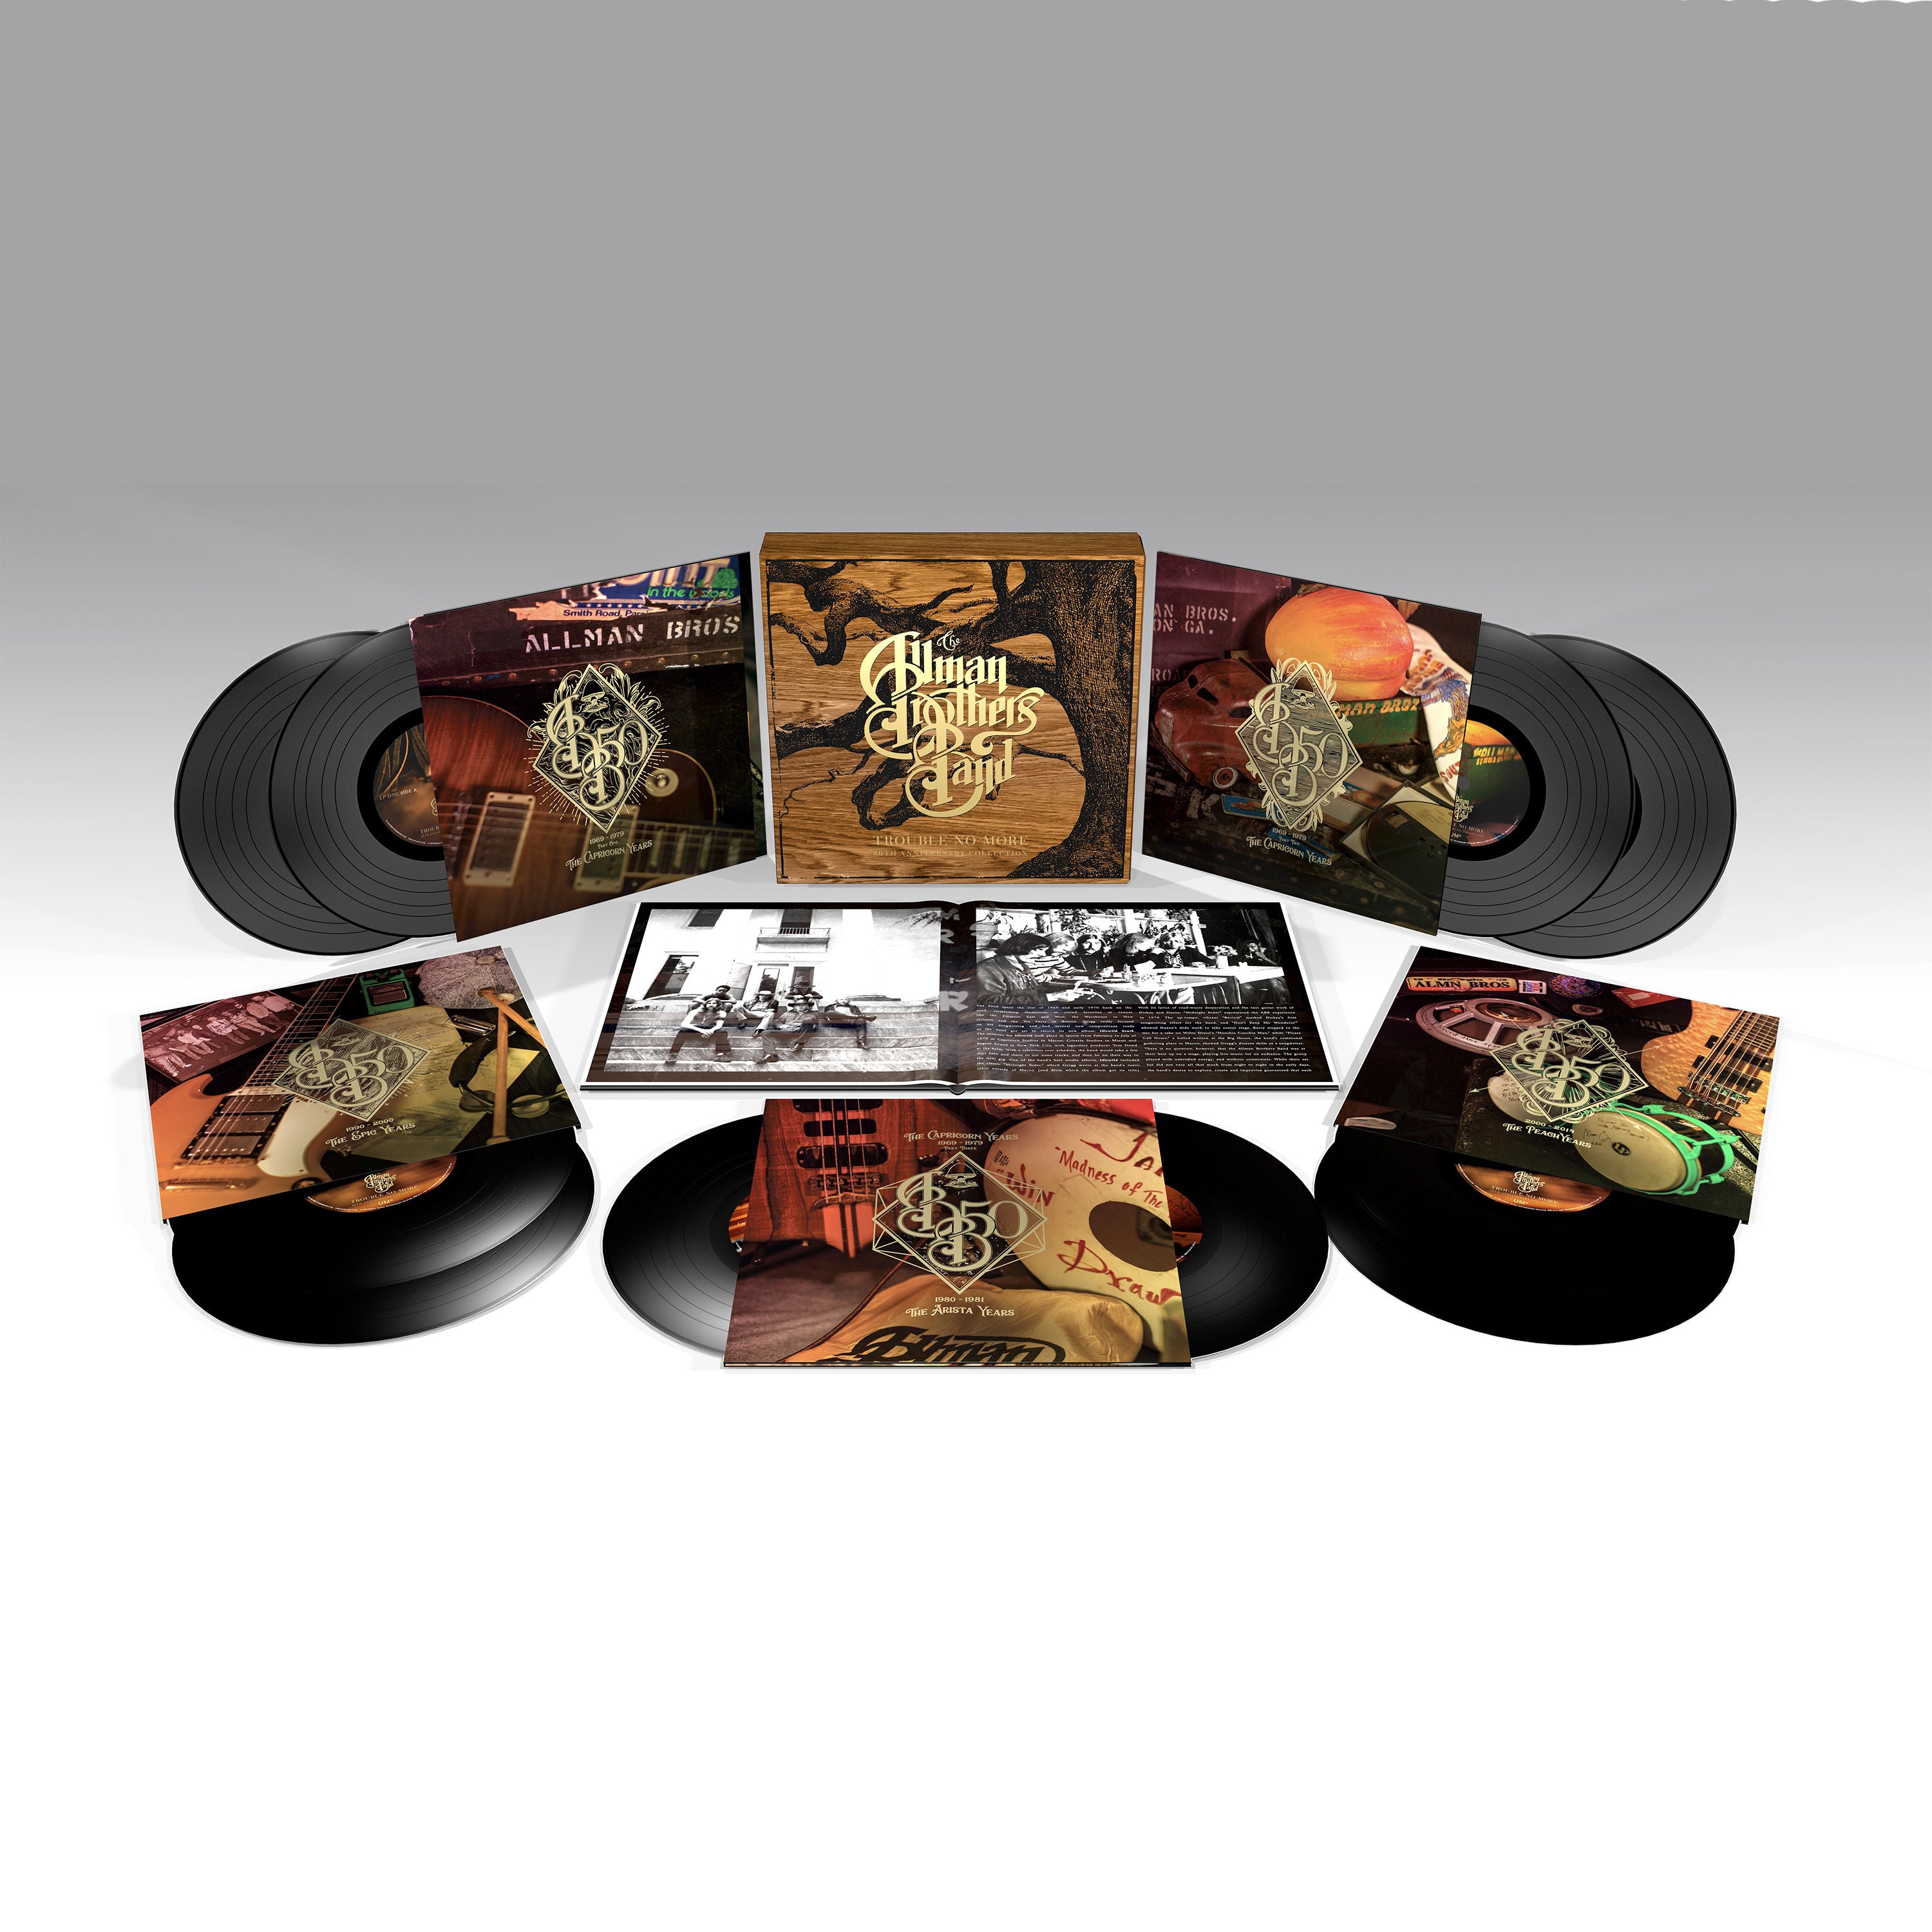 The Allman Brothers Band - Trouble No More (50th Anniversary Collection): 10LP Vinyl Box Set